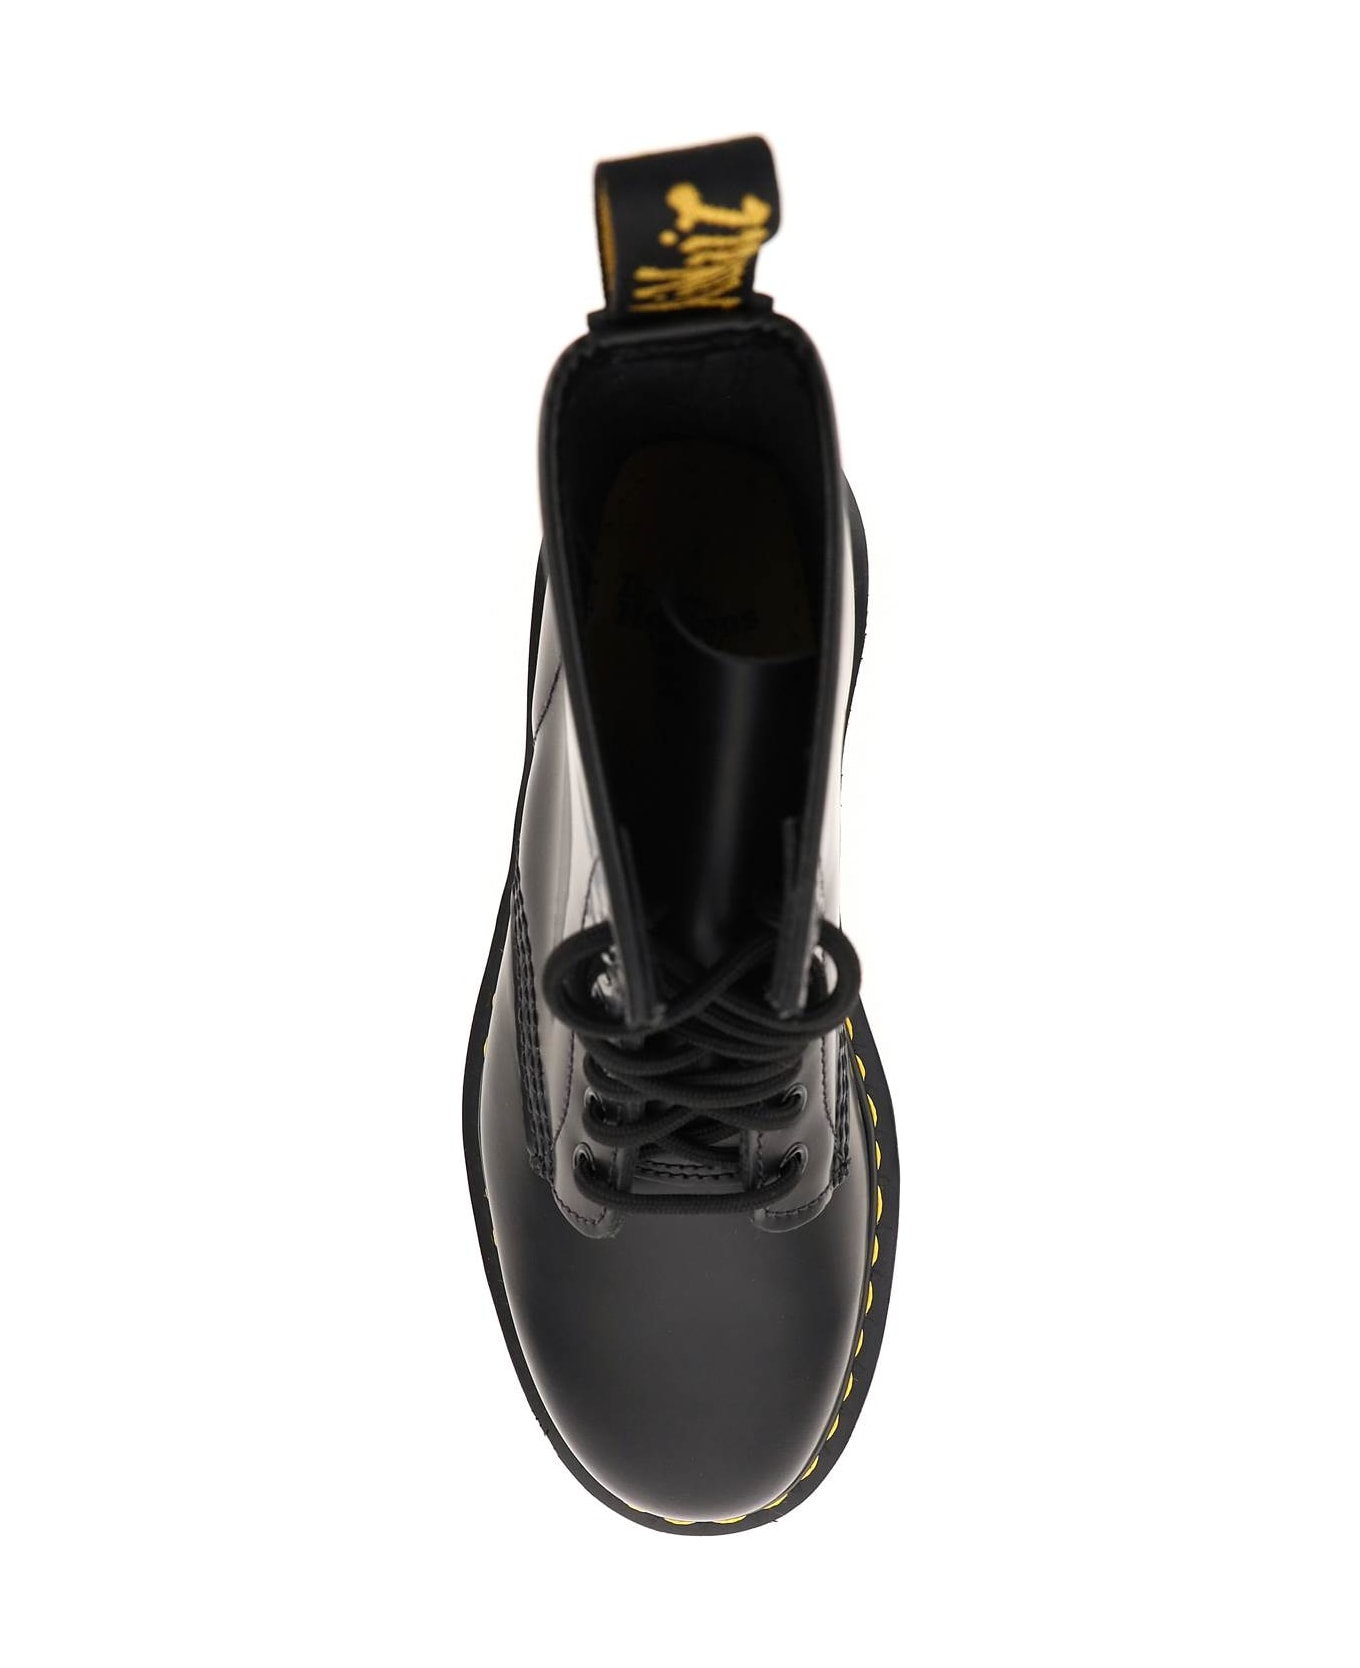 Dr. Martens 1460 Smooth Leather Combat Boots - Black シューズ